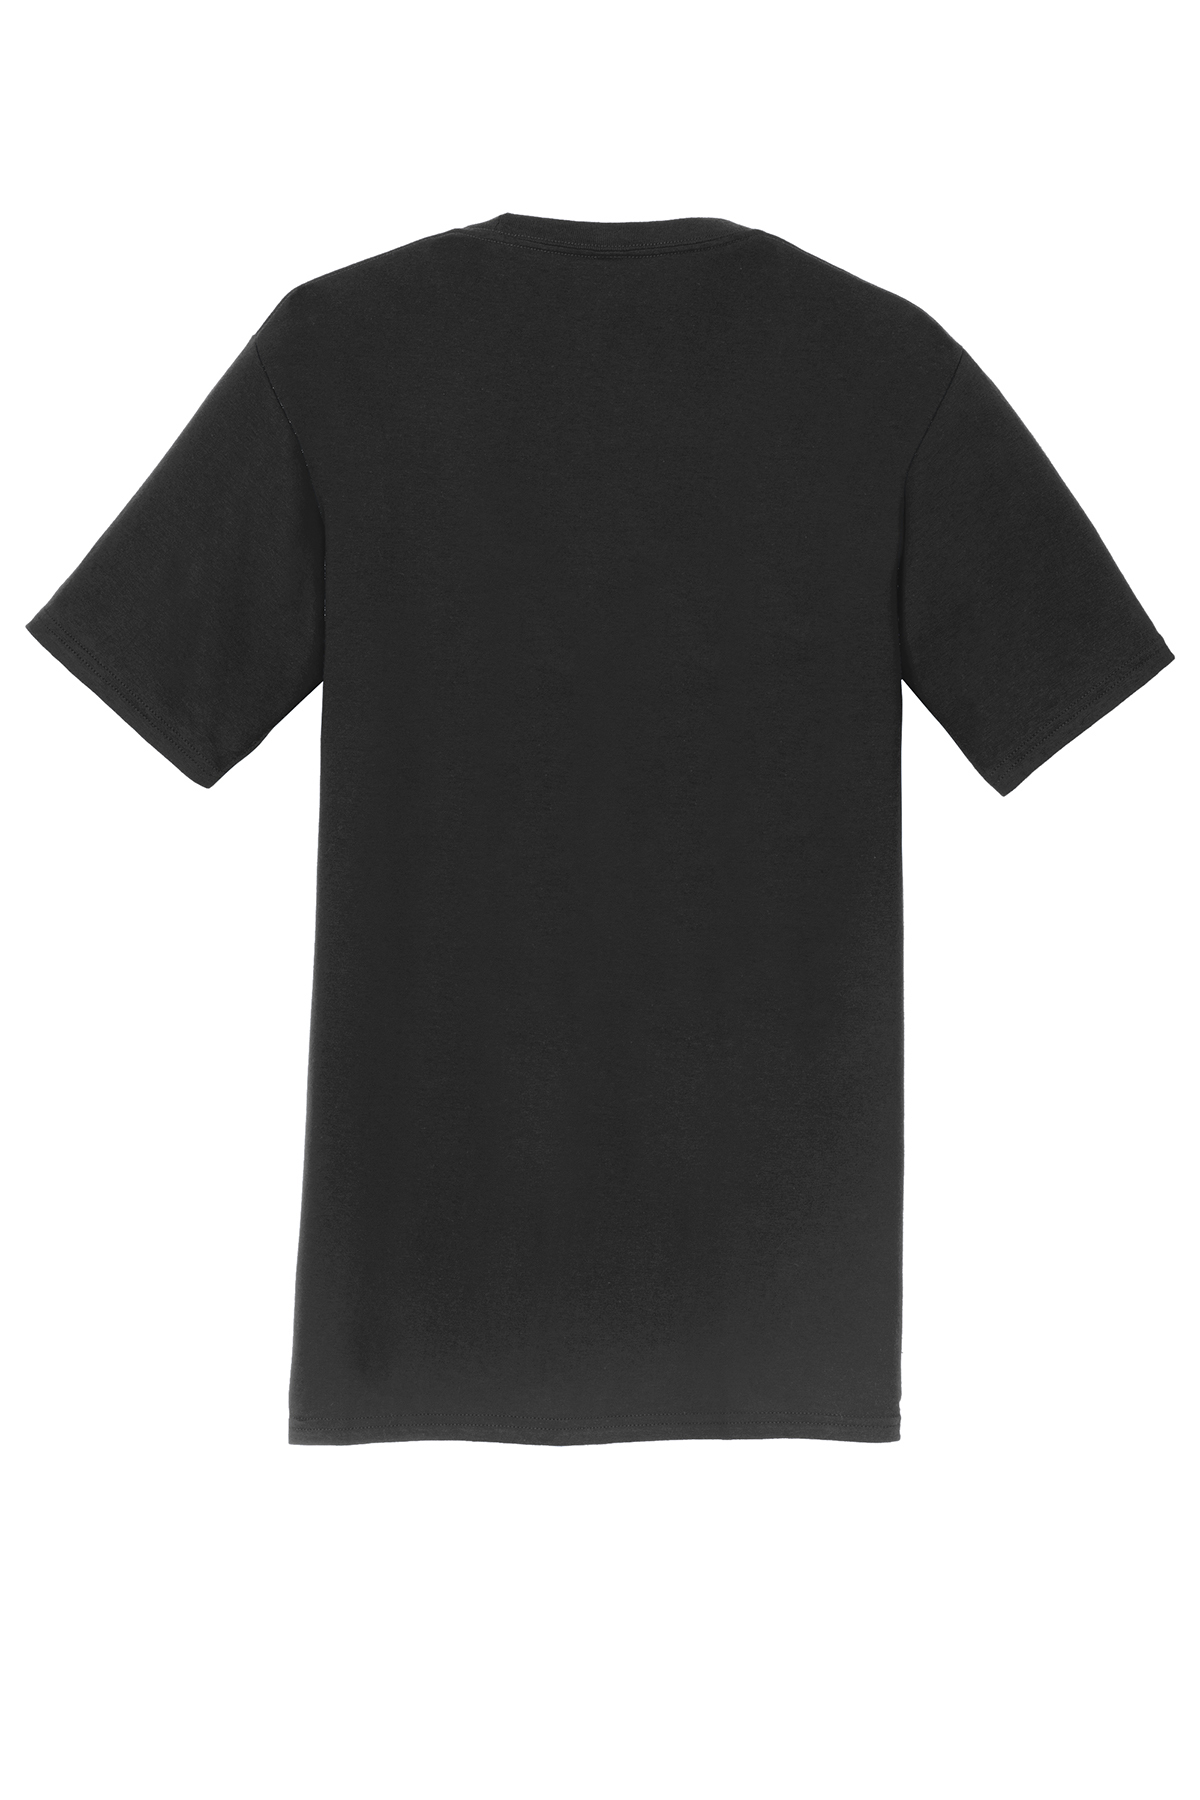 Port & Company ® Fan Favorite™ Tee | Product | Company Casuals